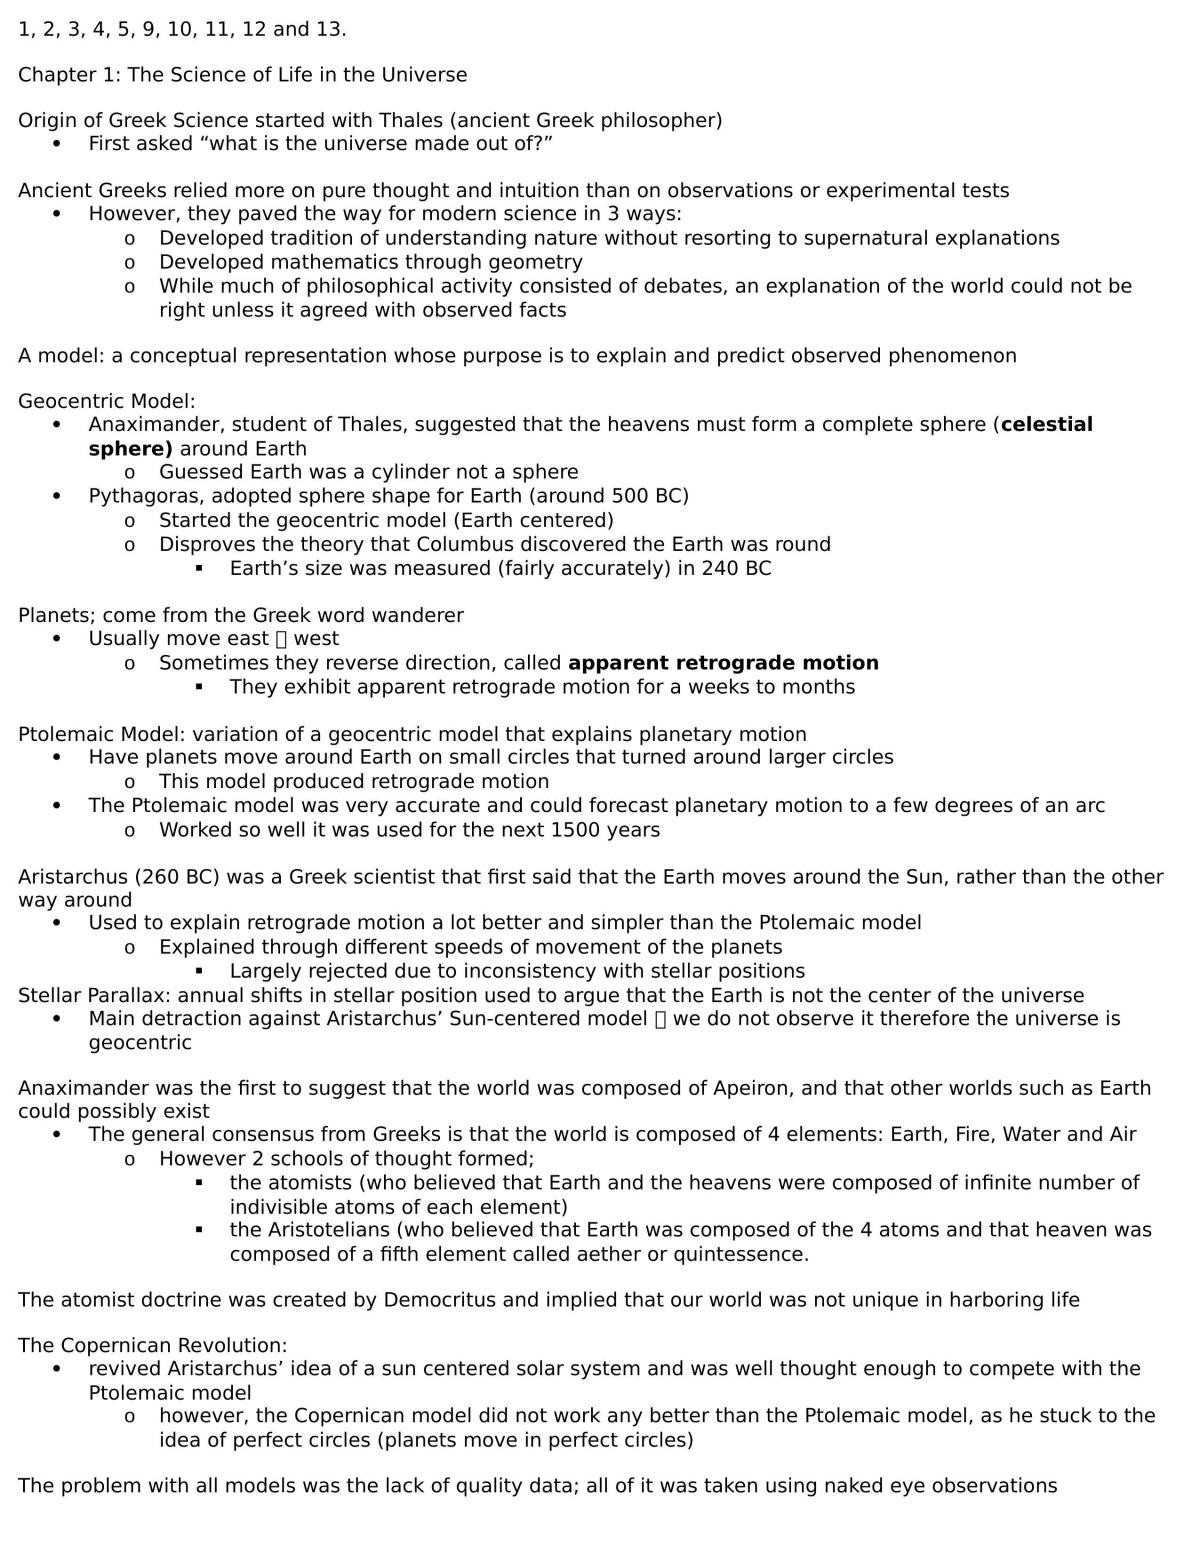 Complete Study Notes - ASTRO 2021 - Page 1